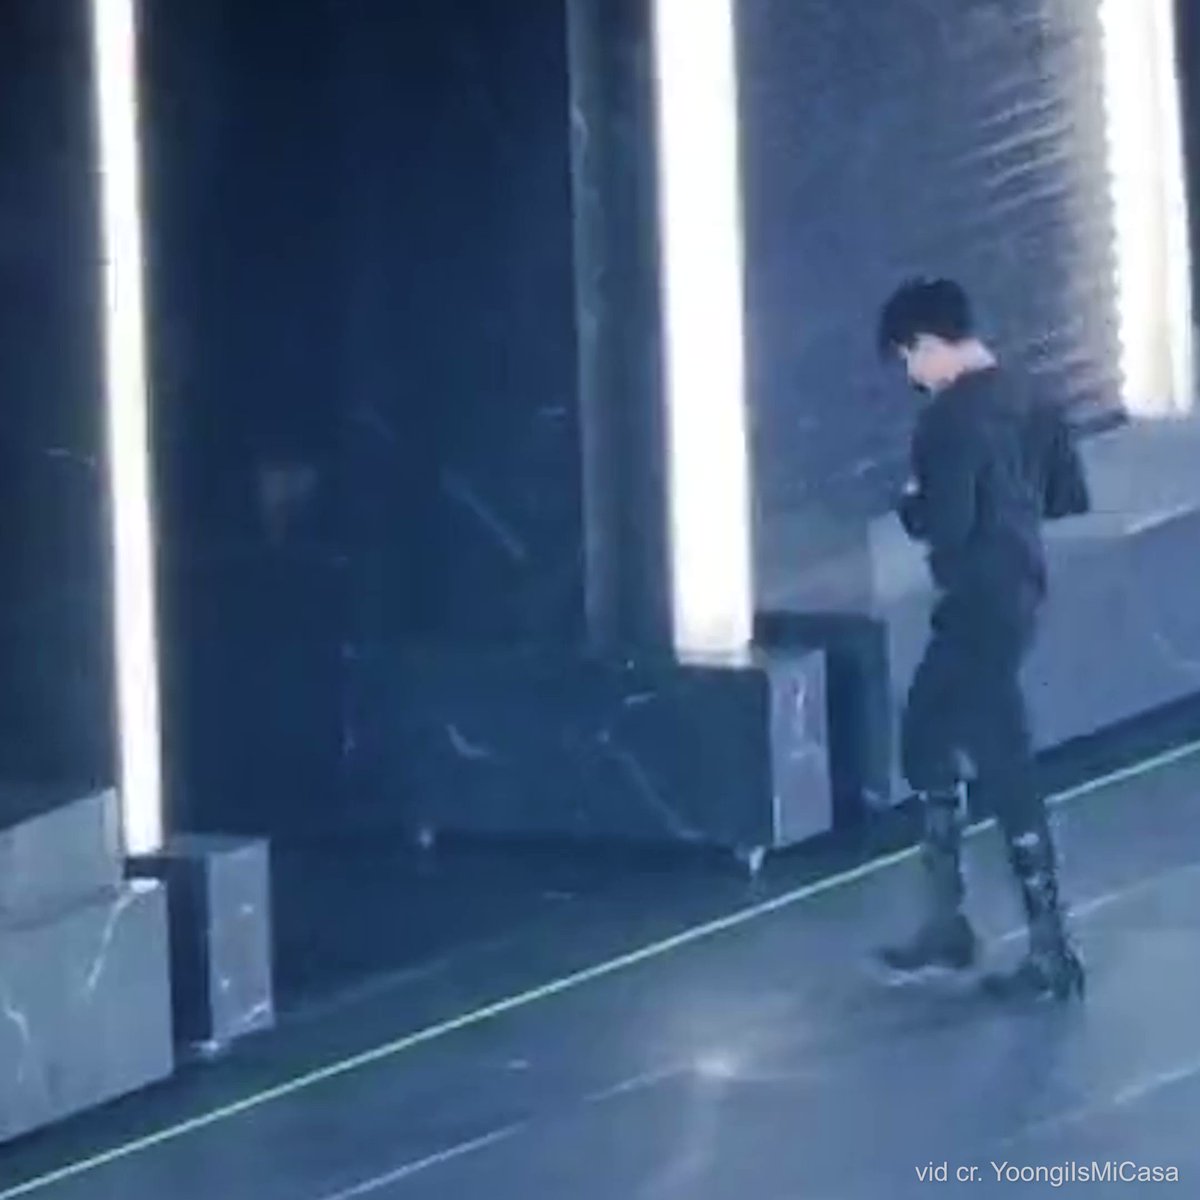 RT @jjklve: jungkook taking off his shirt while leaving the stage https://t.co/fLqrdCZeZc